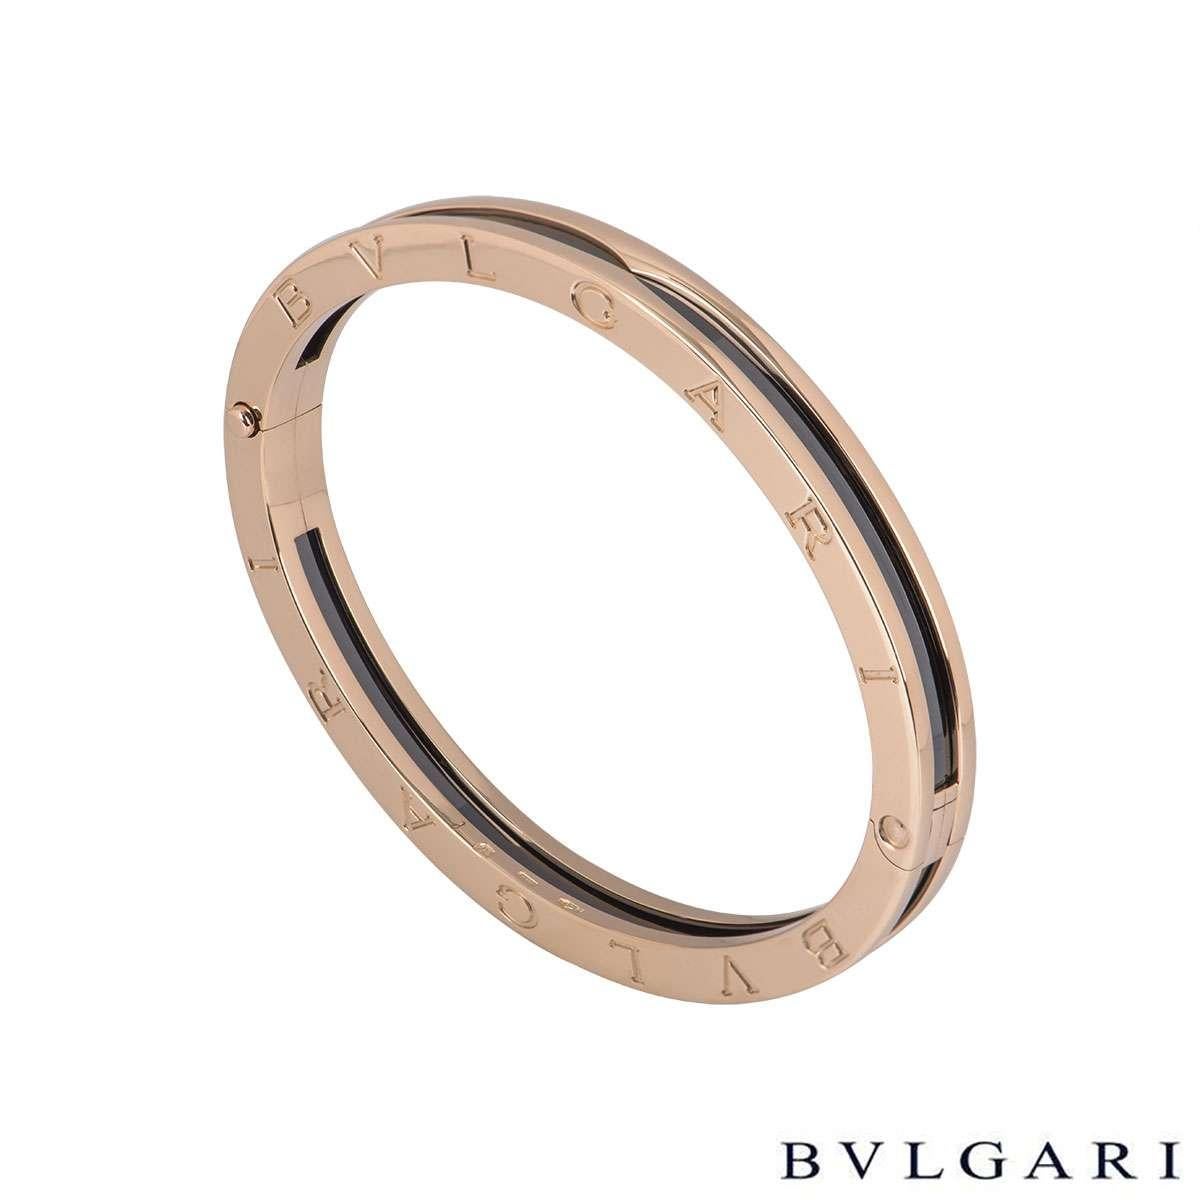 An 18k rose gold B.zero1 bracelet by Bvlgari. The bracelet has a black ceramic centre with 18k rose gold boarders with 'Bvlgari Bvlgari' engraved around the outer edge.The bracelet measures 7mm in width and will fit a wrist size up to 7 inches. The